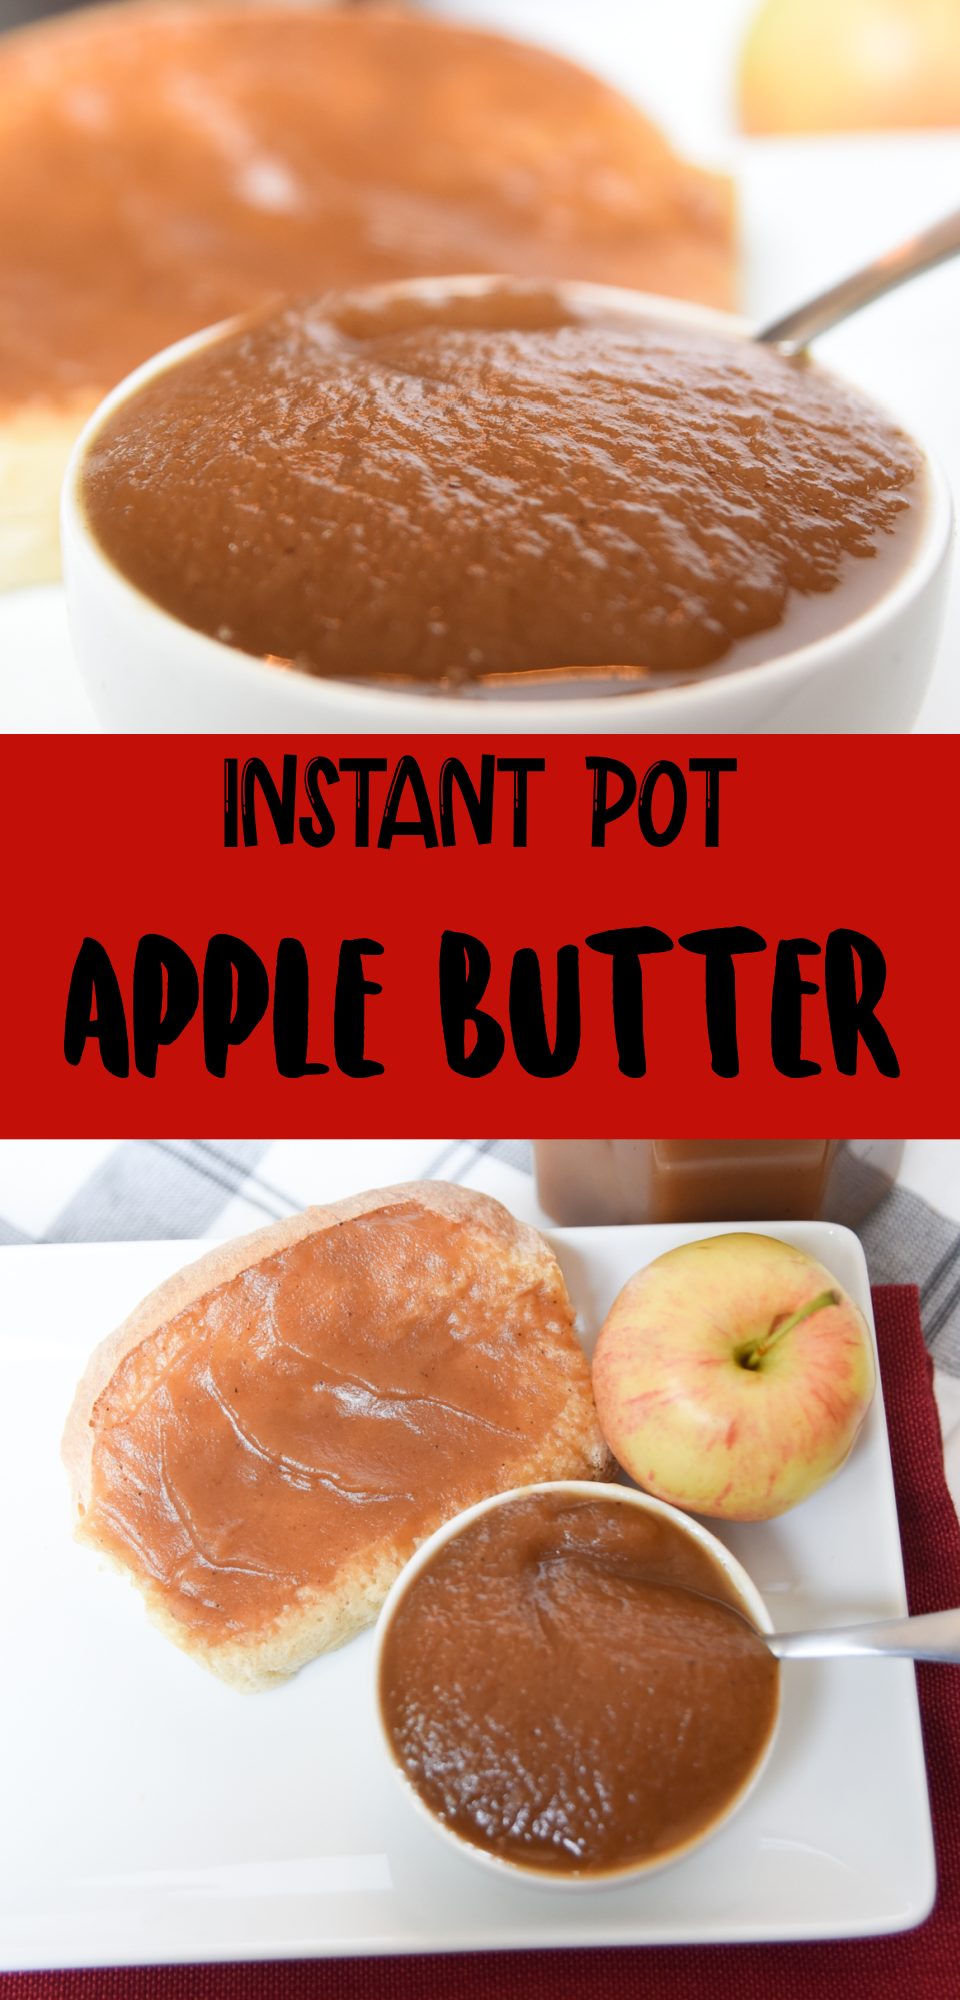 Apple butter is a delicious recipe that you can make that the whole family will enjoy. This Instant Pot Apple Butter recipe is sure to be a huge hit - it's so easy to make and has amazing flavor!